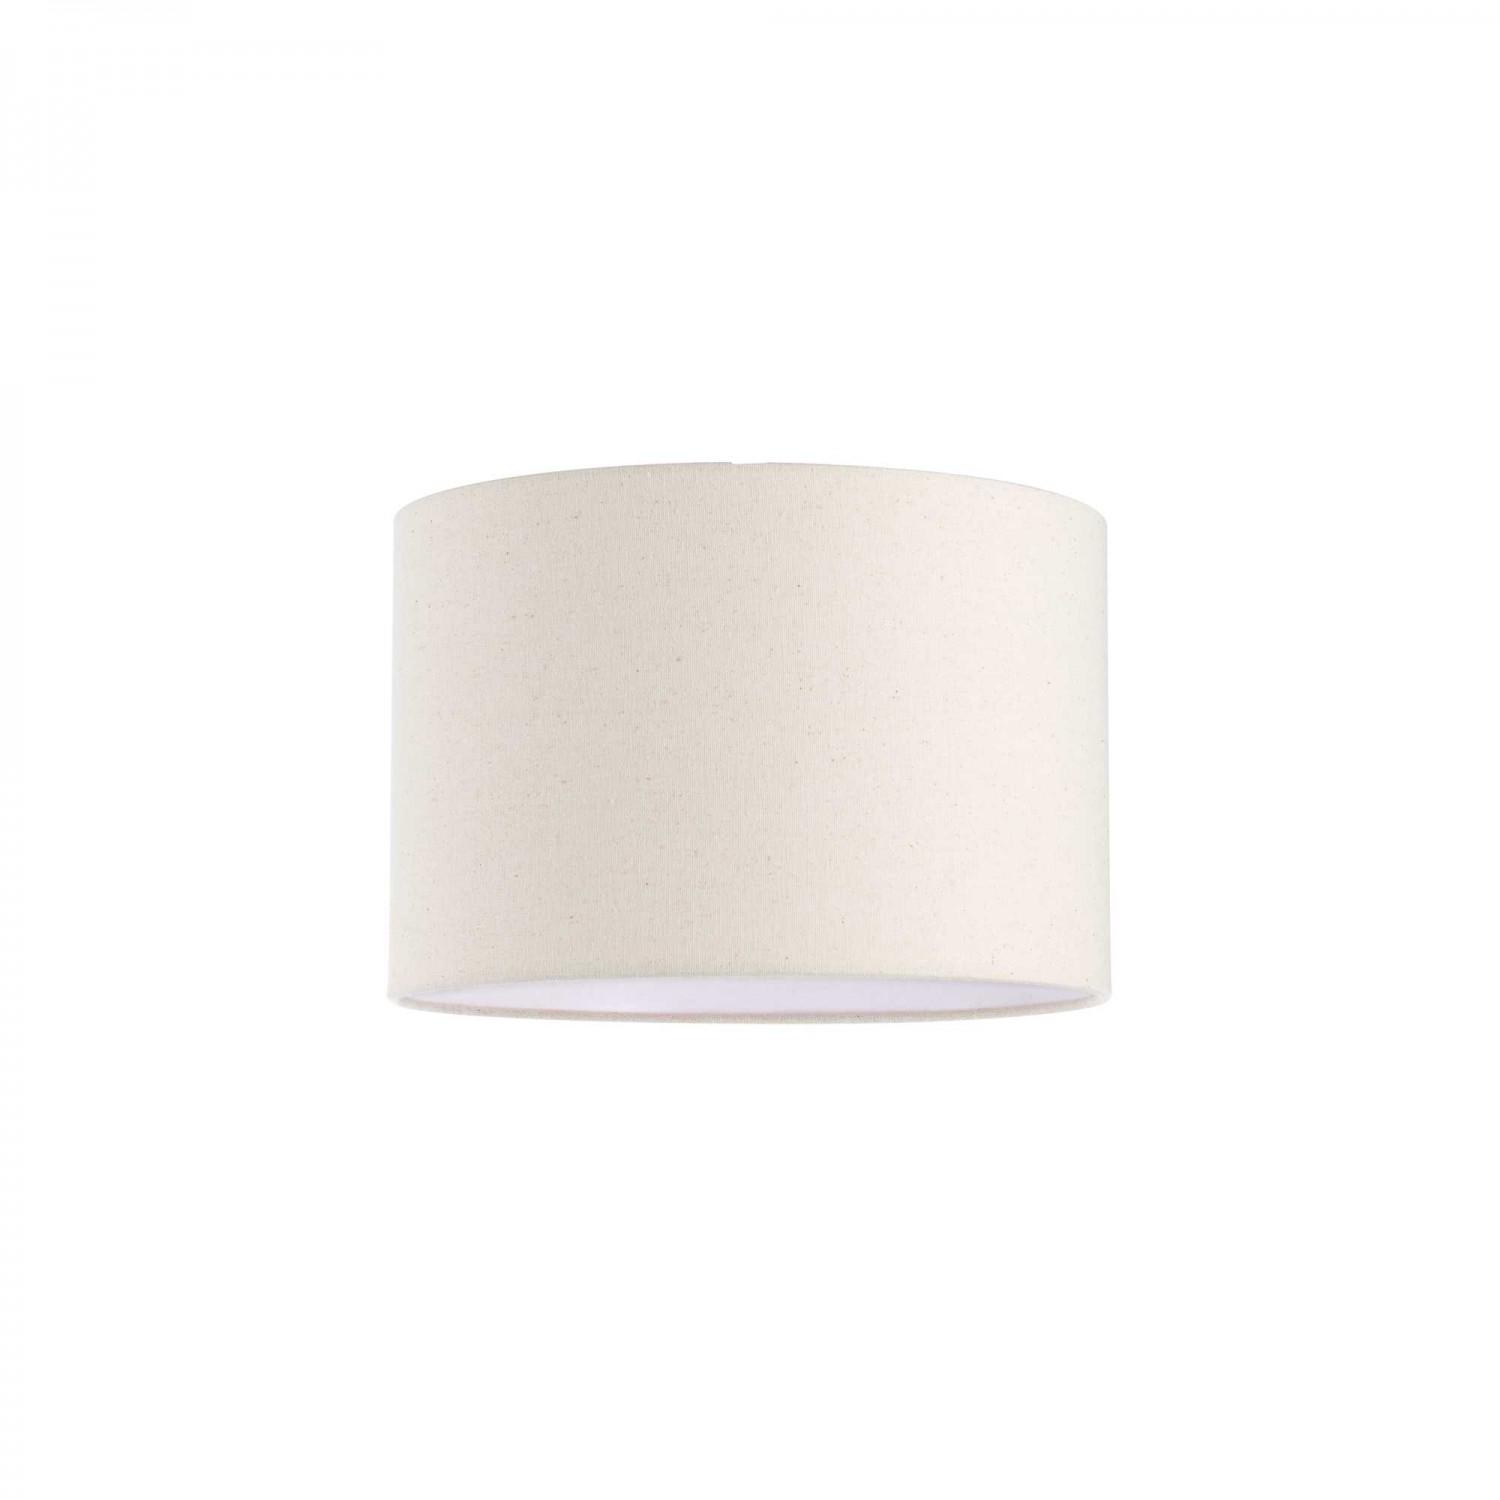 alt_image Абажур Ideal Lux SET UP PARALUME CILINDRO D30 BEIGE 260440